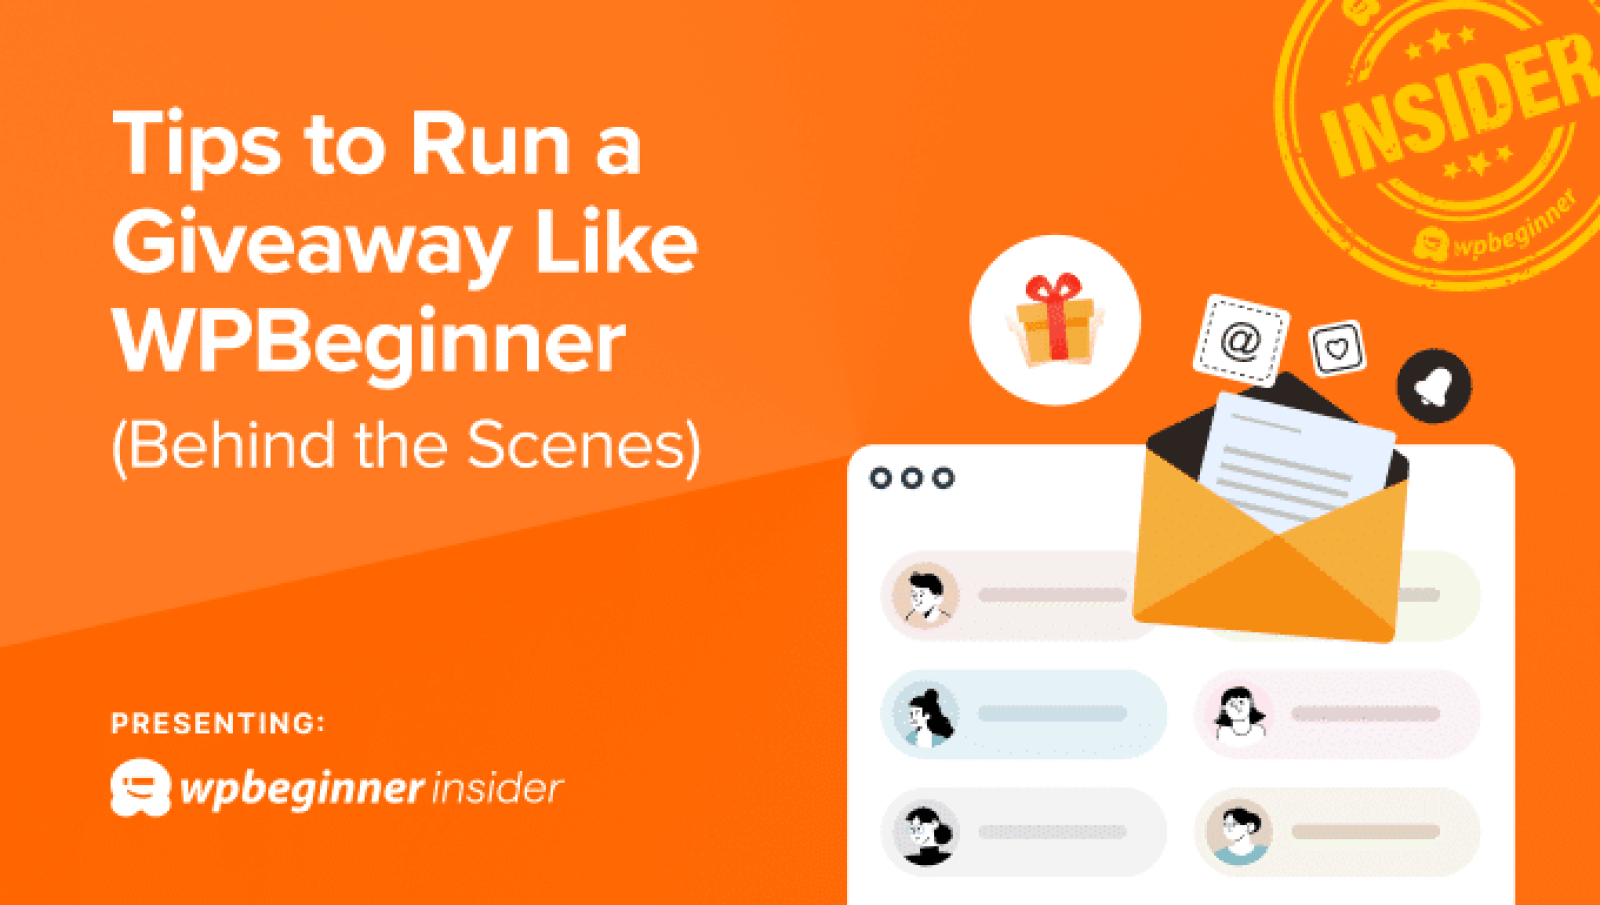 6 Tricks to Run a Profitable Viral Giveaway Like WPBeginner (Behind the Scenes)